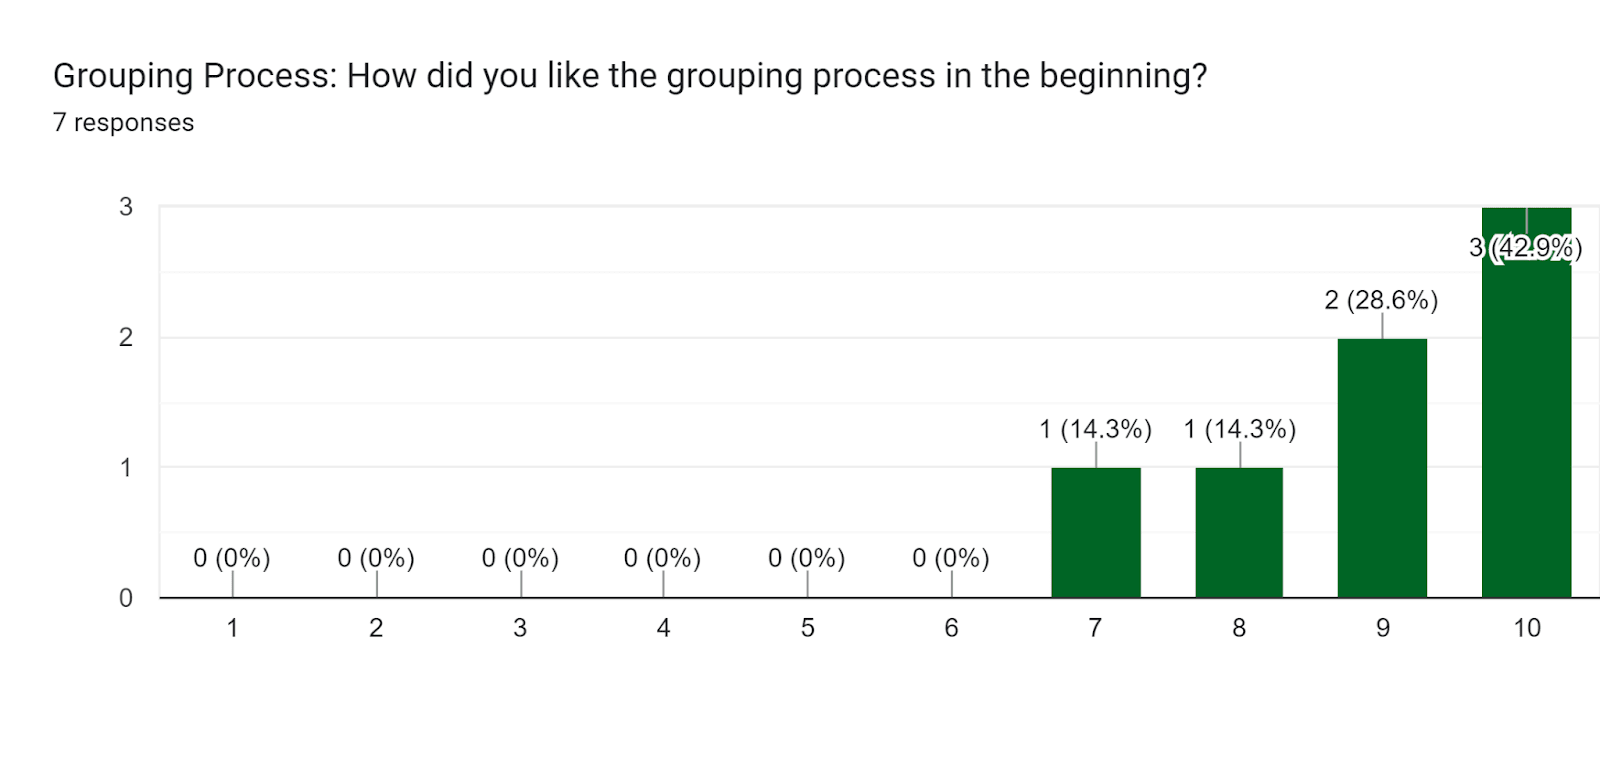 Forms response chart. Question title: Grouping Process: How did you like the grouping process in the beginning?. Number of responses: 7 responses.